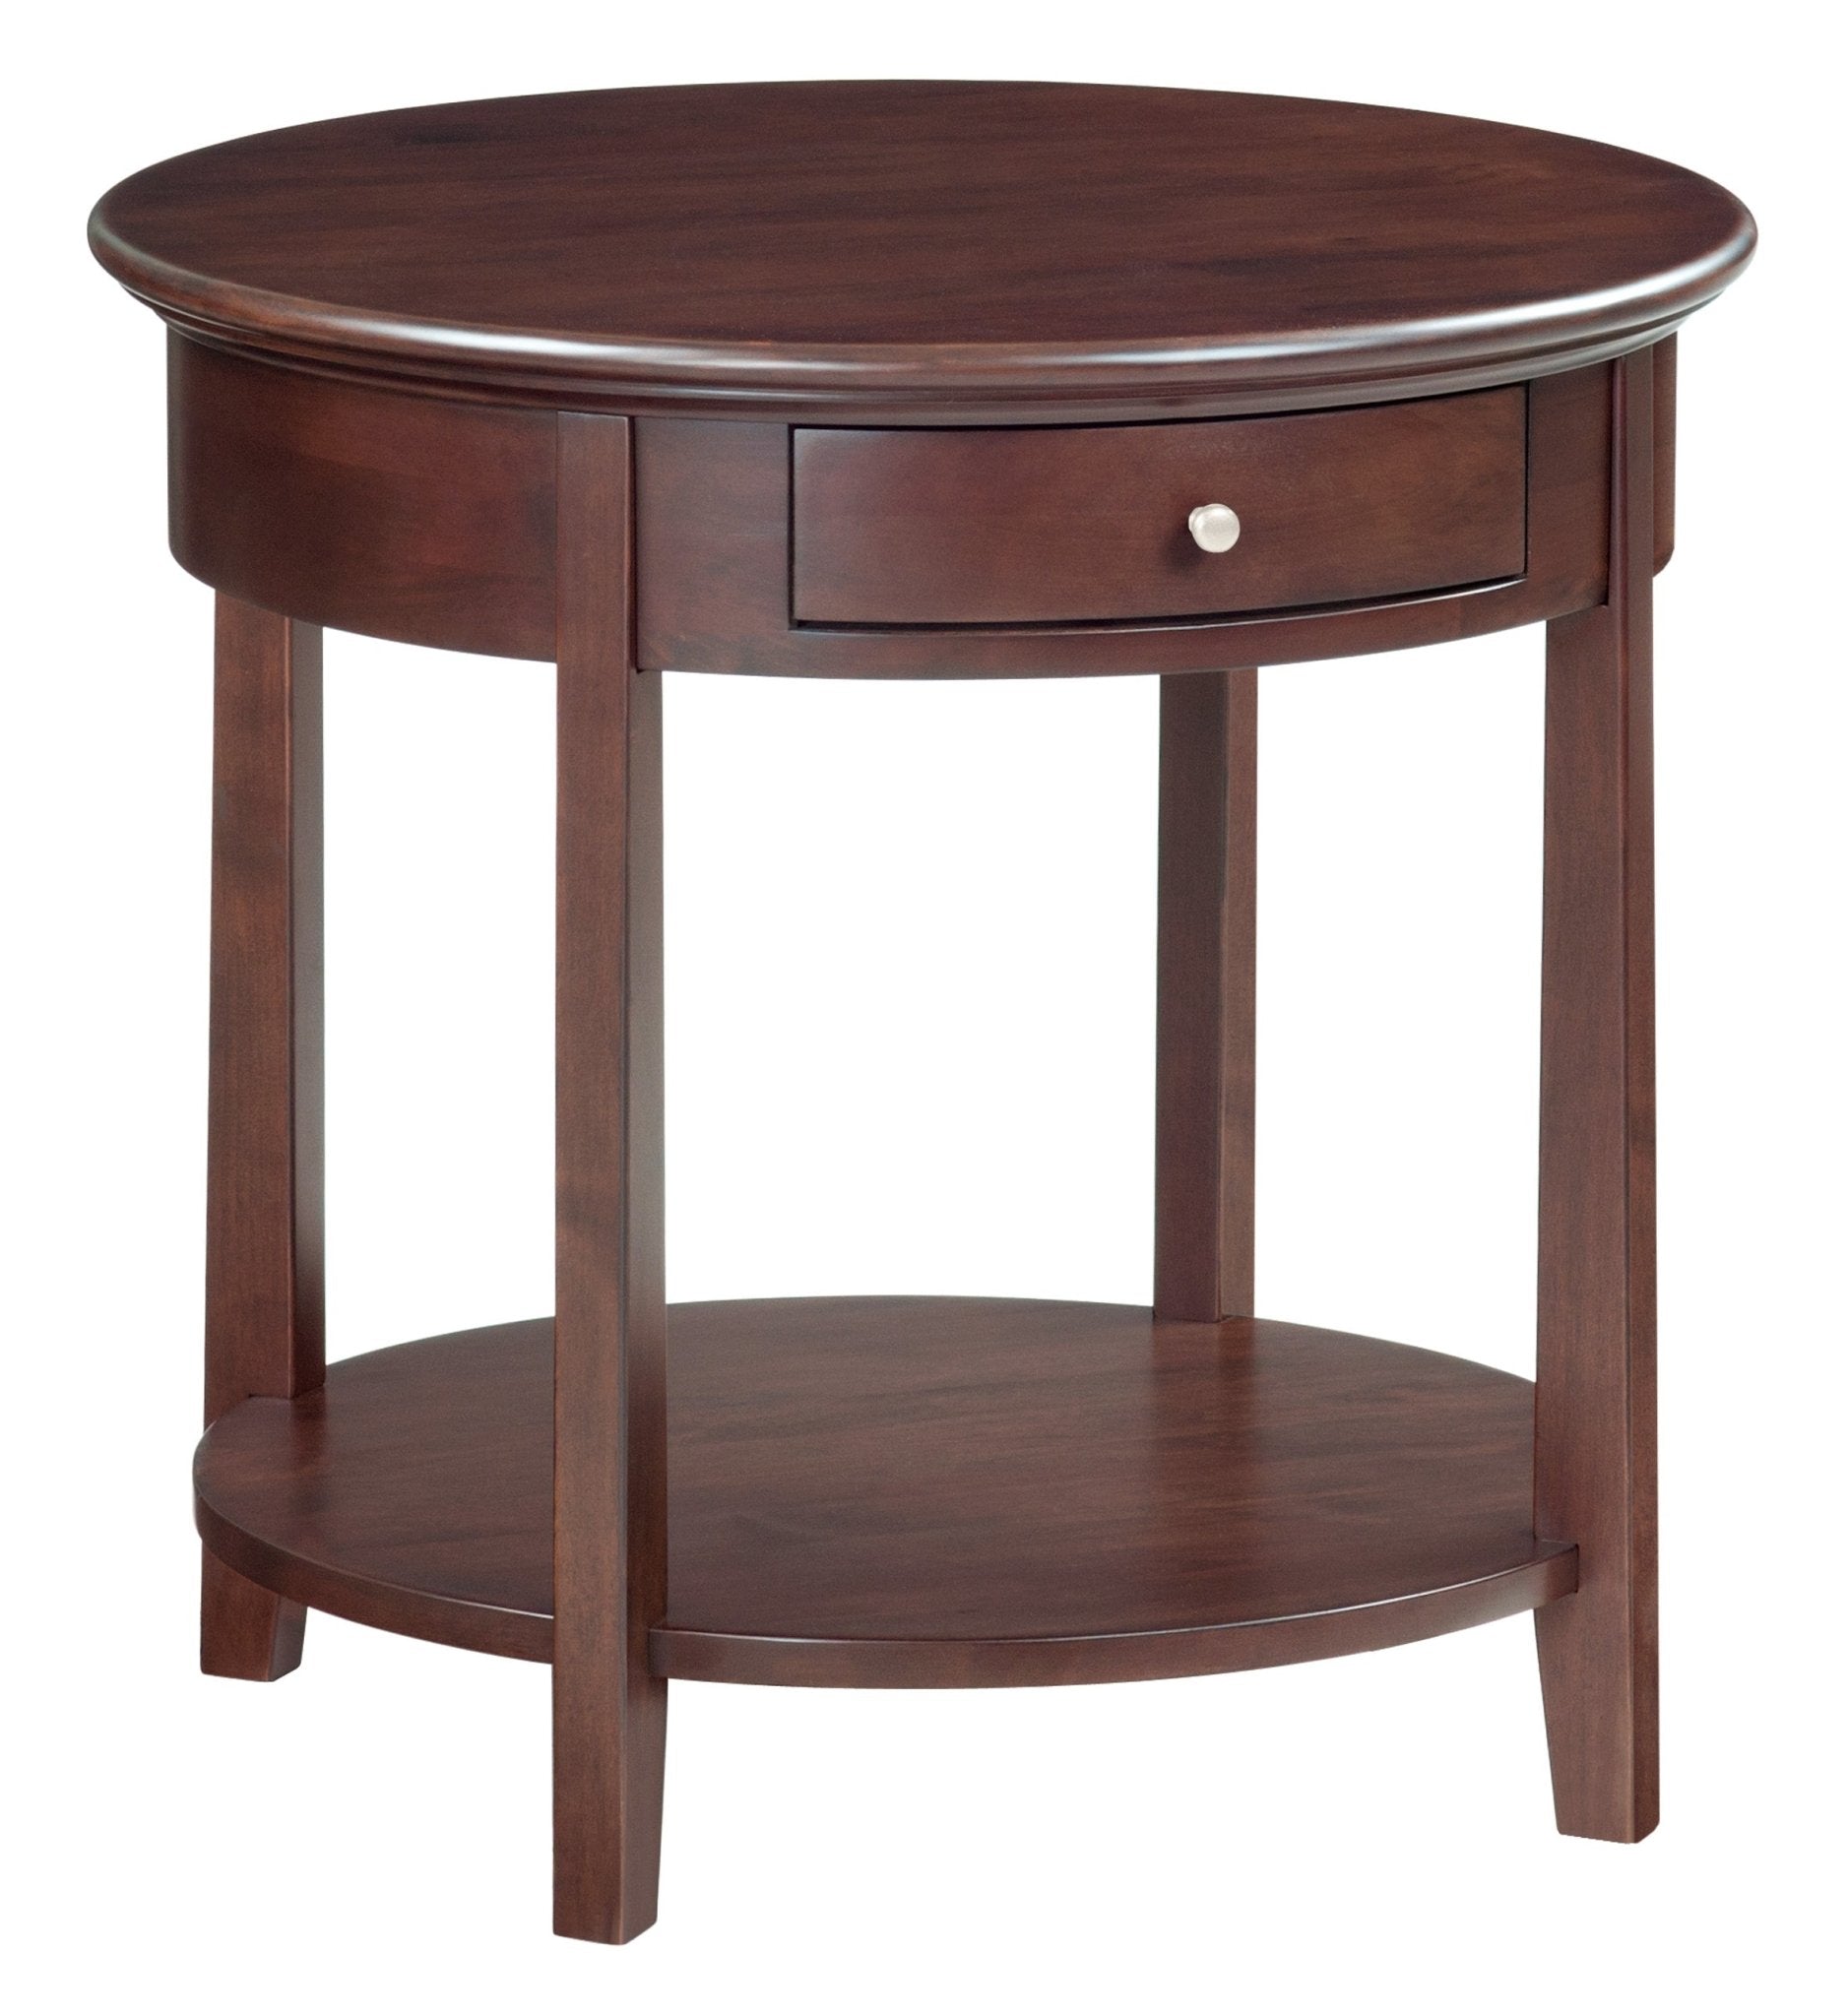 McKenzie Round End Table - Baconco